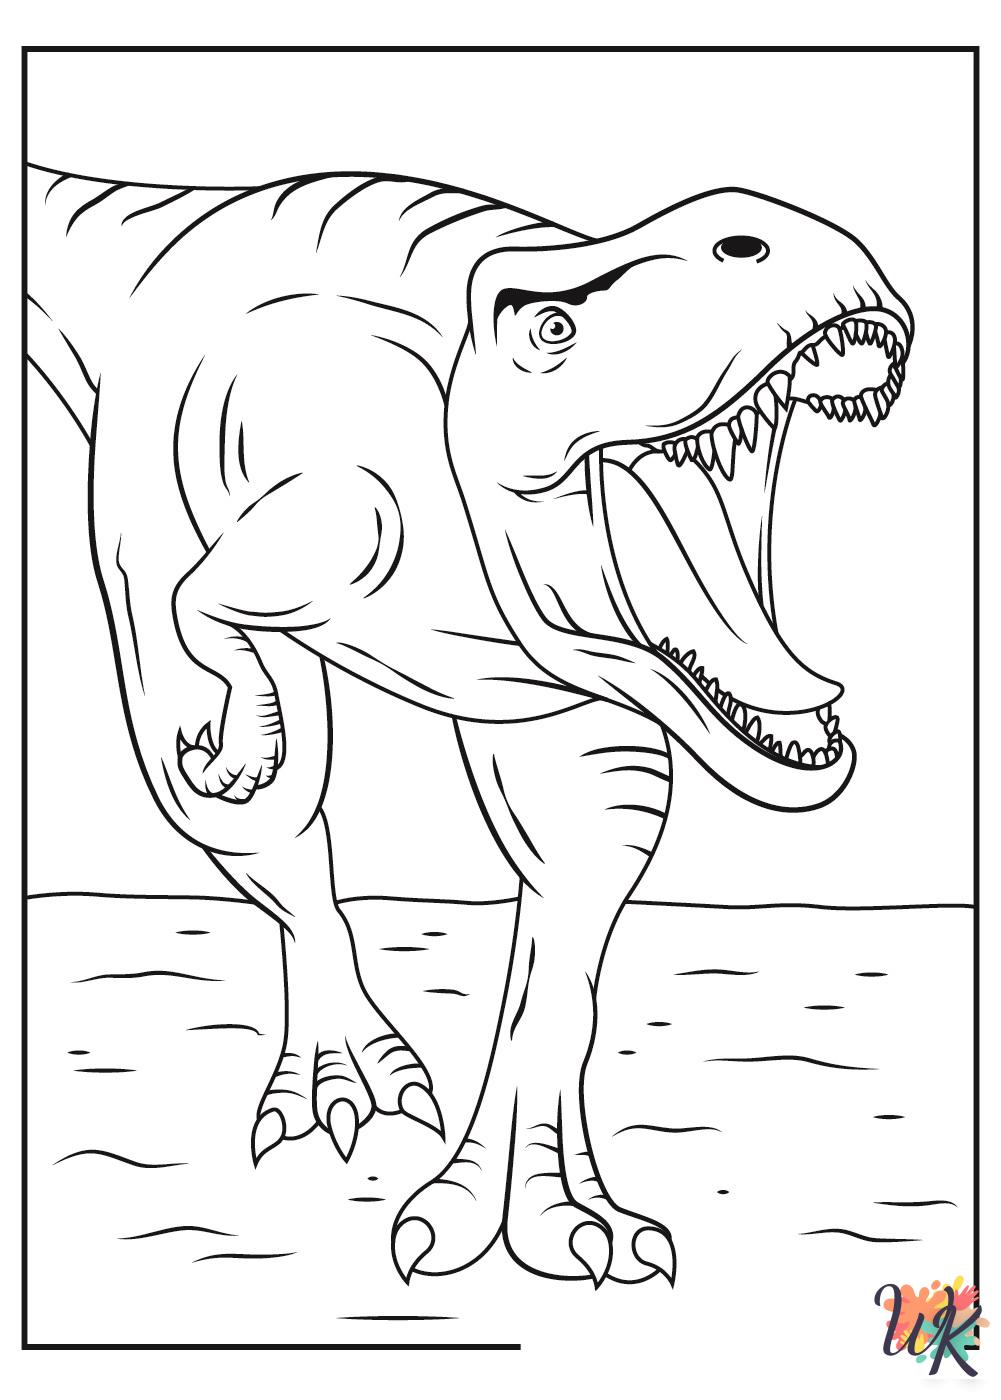 Jurassic Park ornaments coloring pages 1